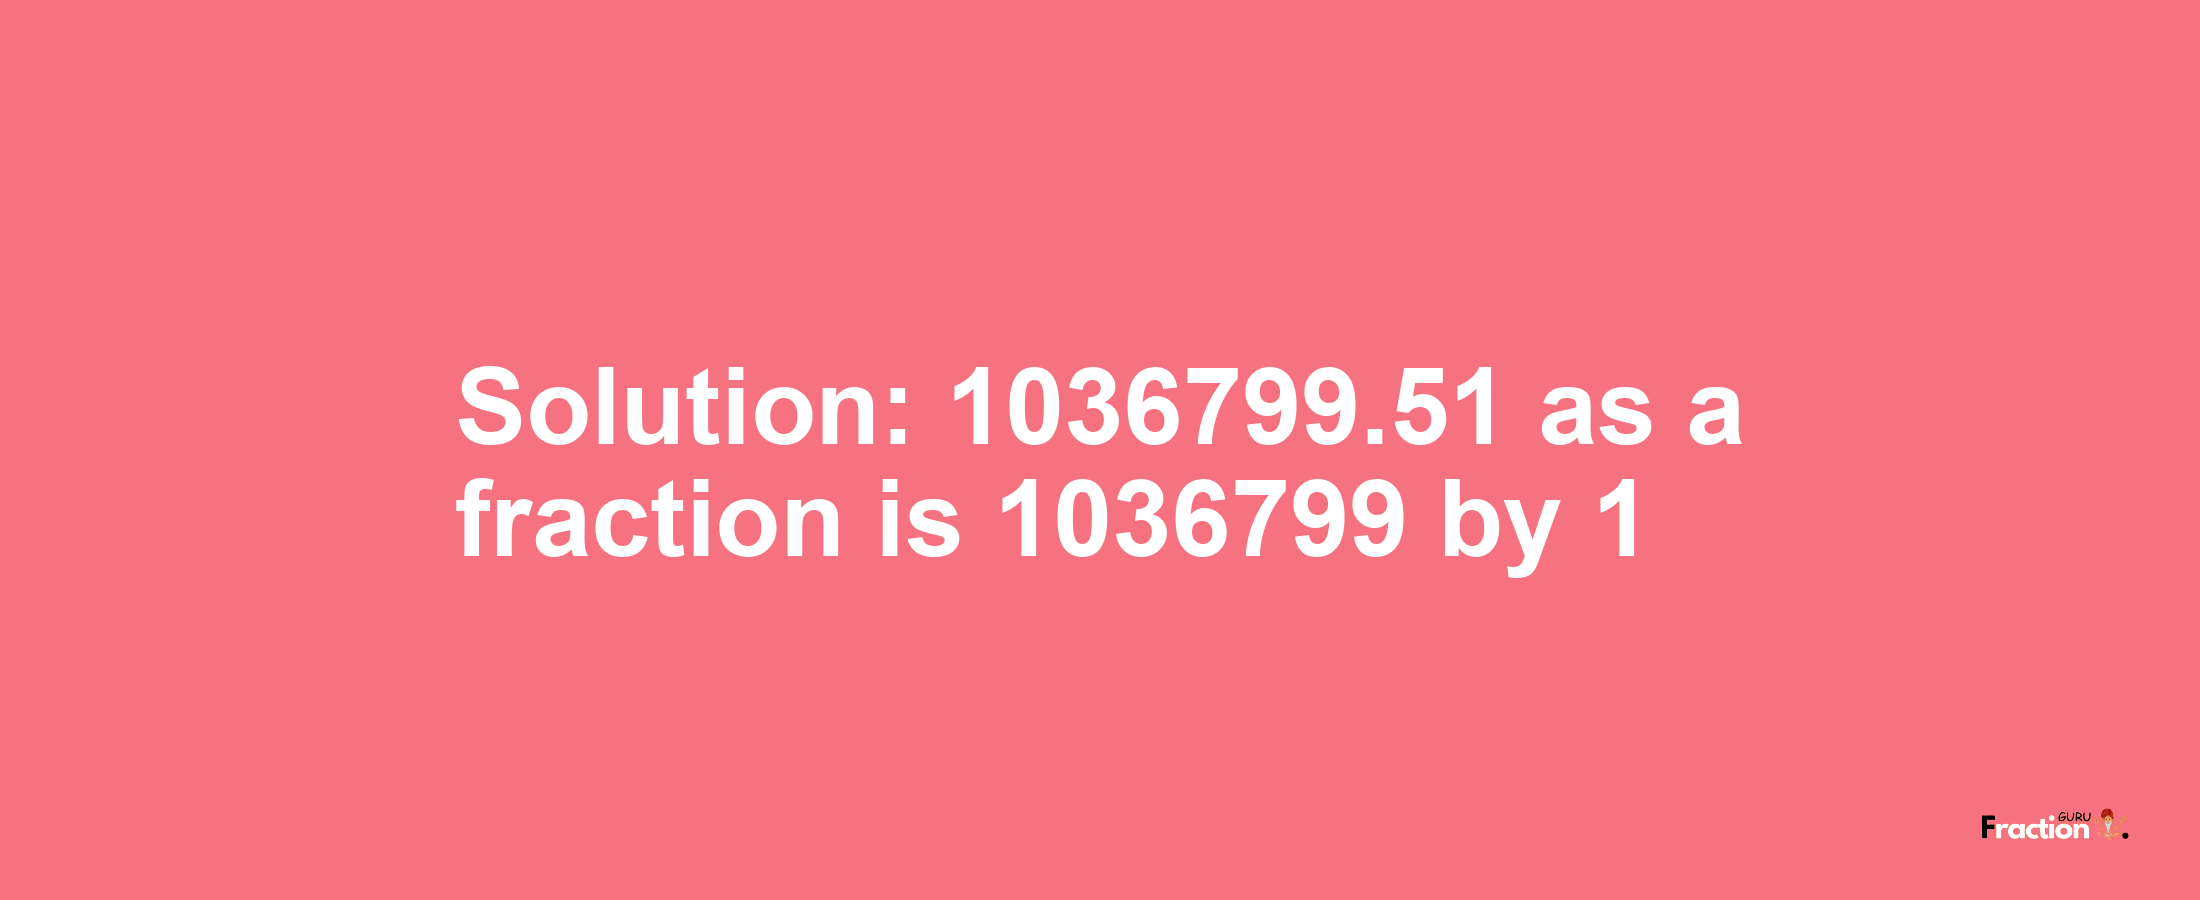 Solution:1036799.51 as a fraction is 1036799/1